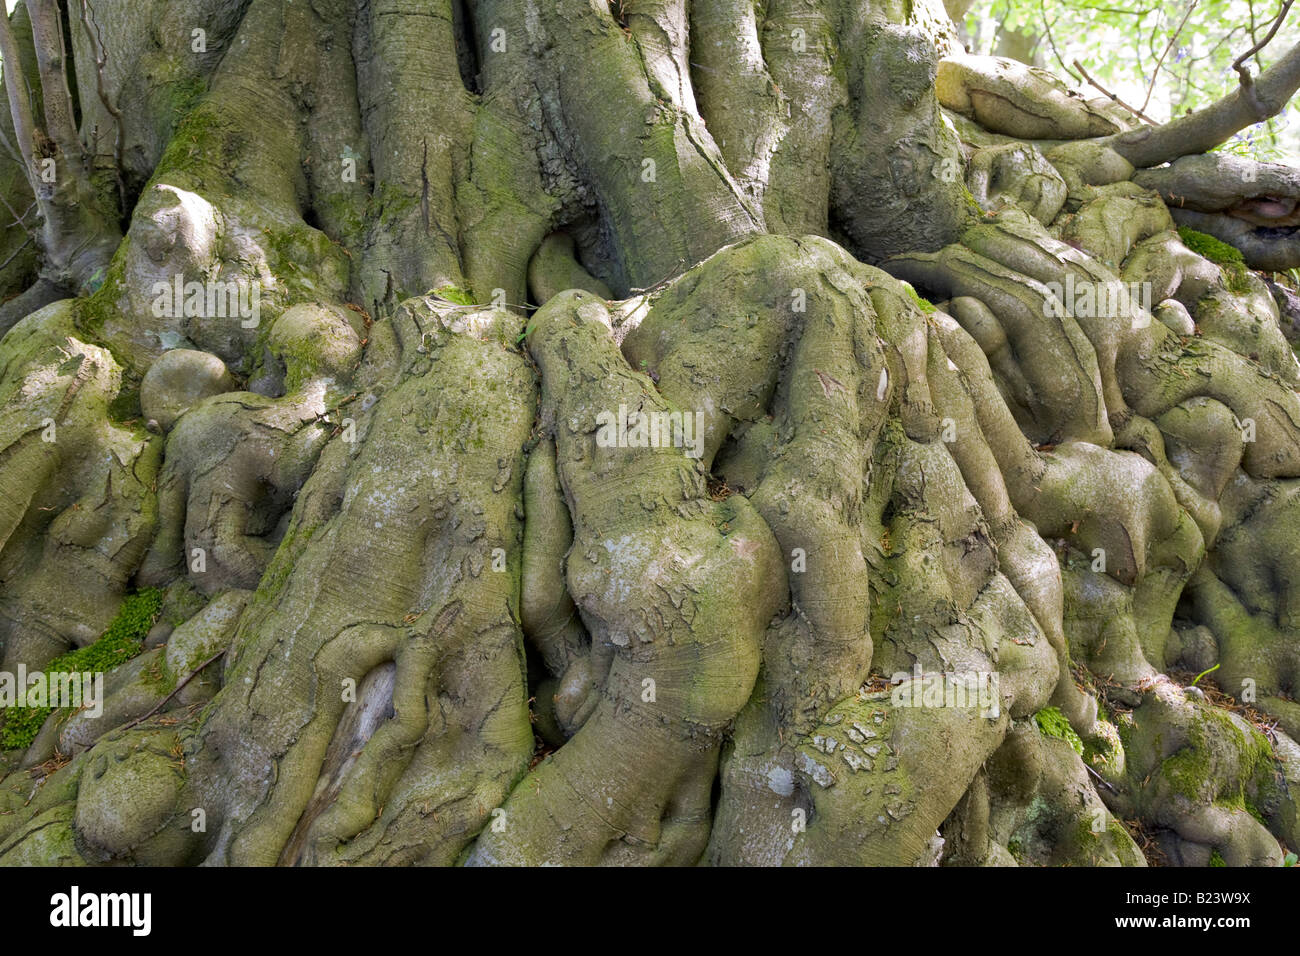 Knarled old roots of a beech tree in a wood in West Sussex, England. Stock Photo